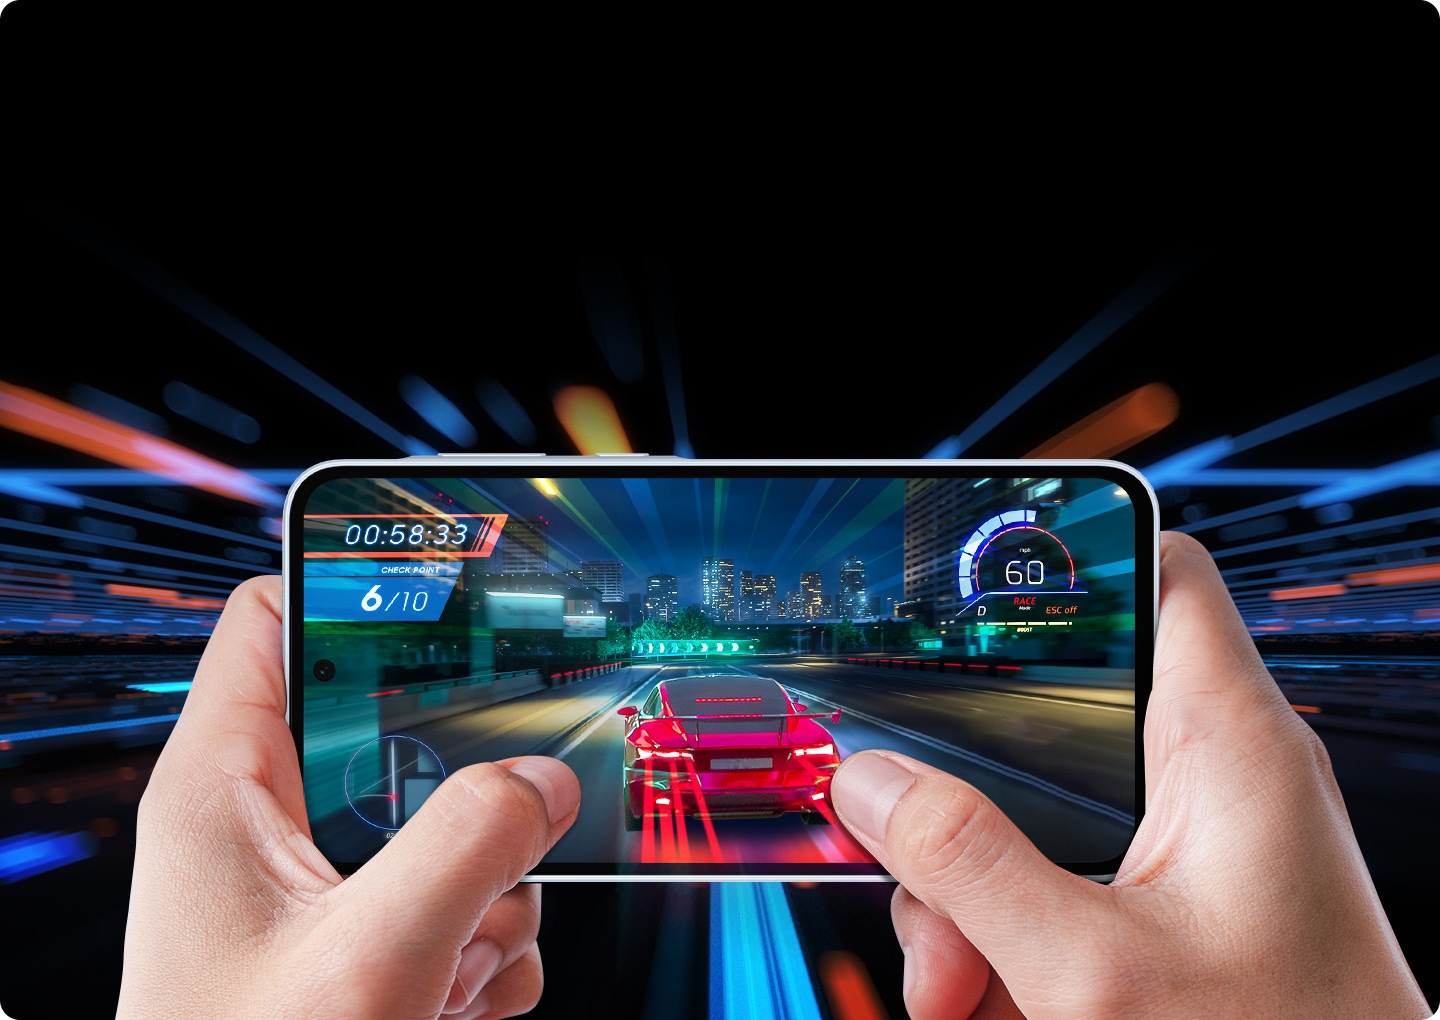 First-person view of a racing game being played on a smartphone held in two hands. The game displays a red sports car speeding on a city highway at night.